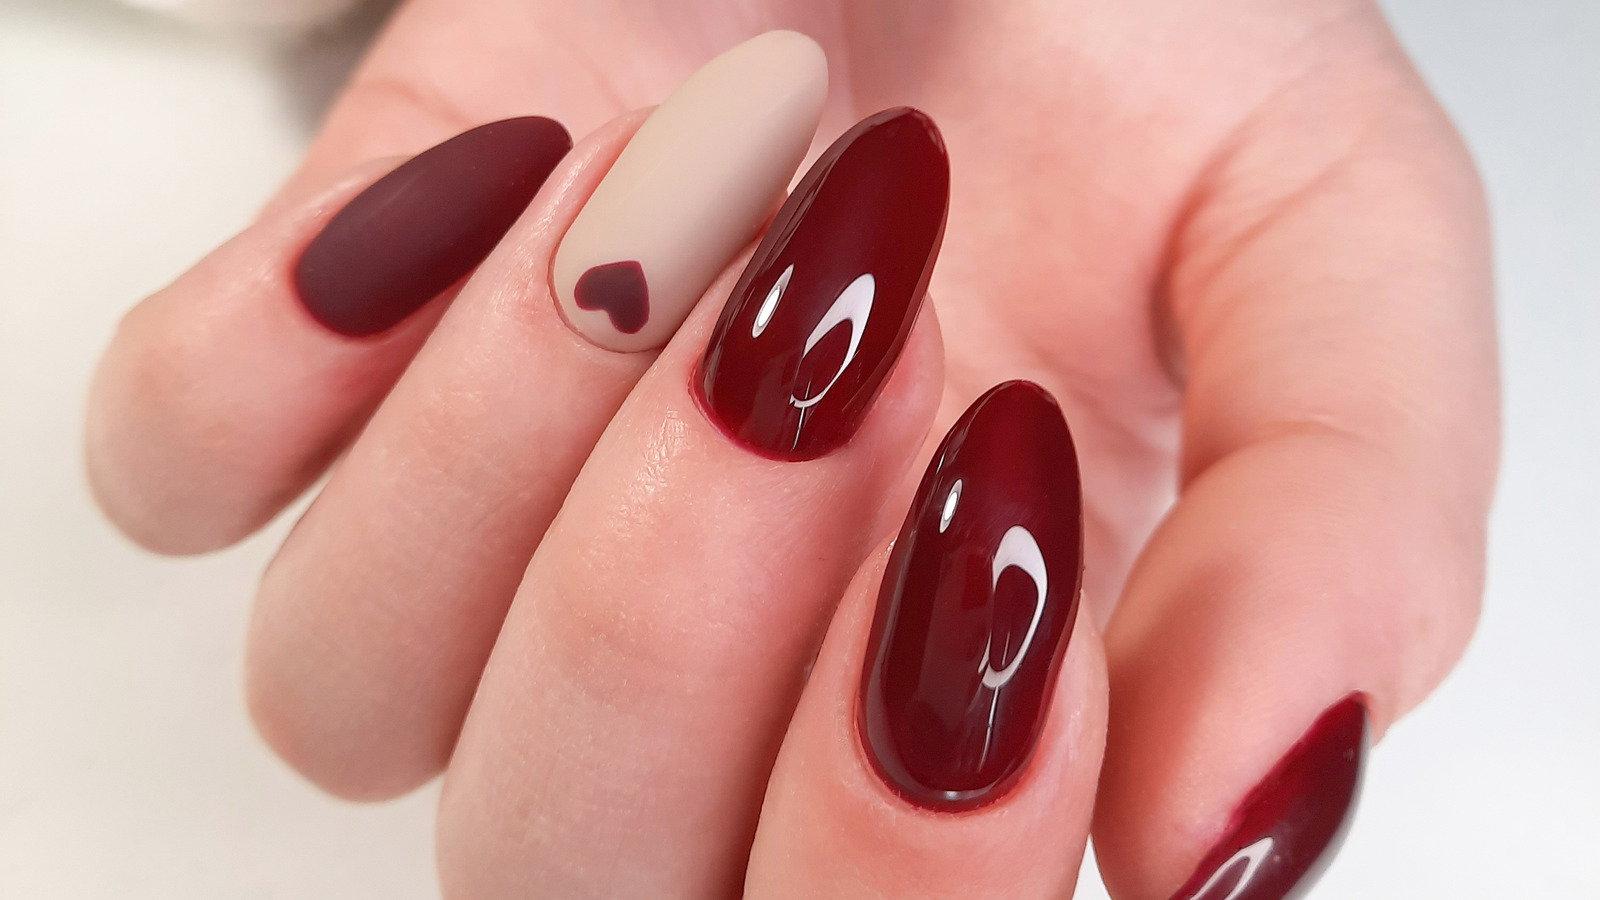 3. "Valentine's Day Nail Colors: Romantic Shades for February" - wide 6